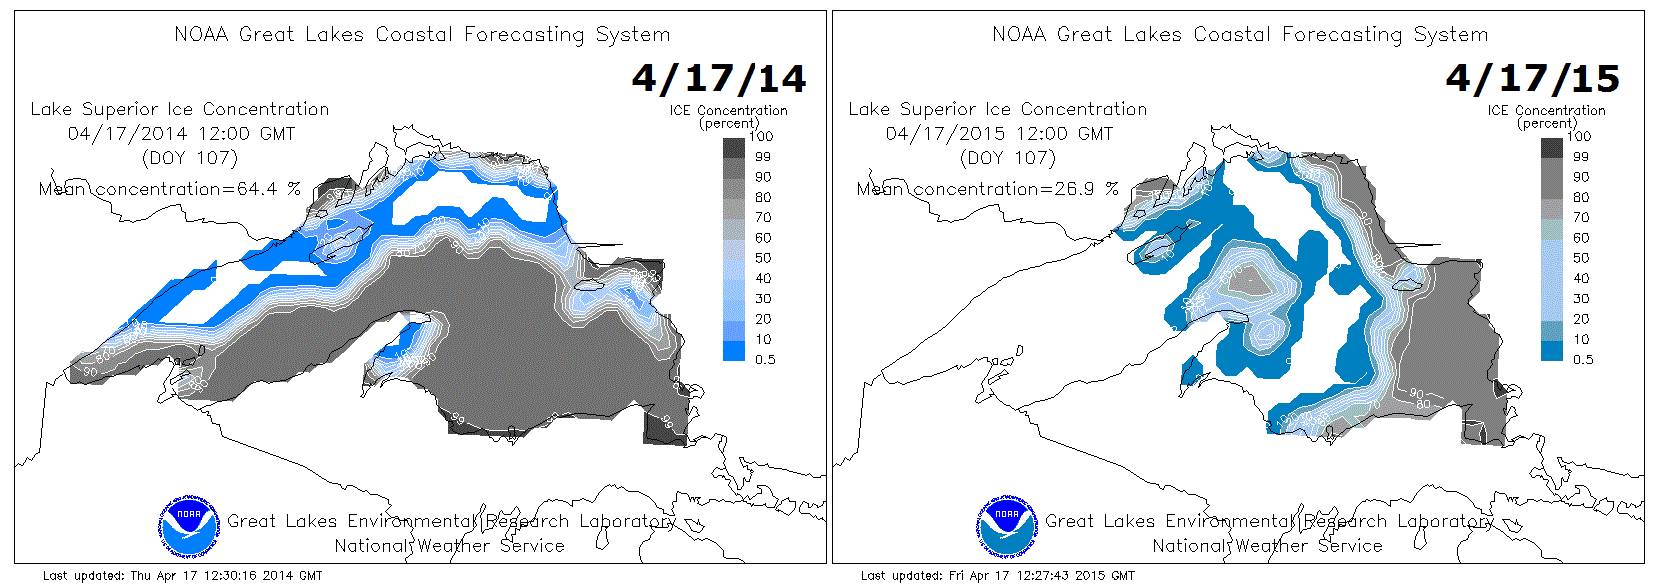 Lake ice 2015 compared to 2014.